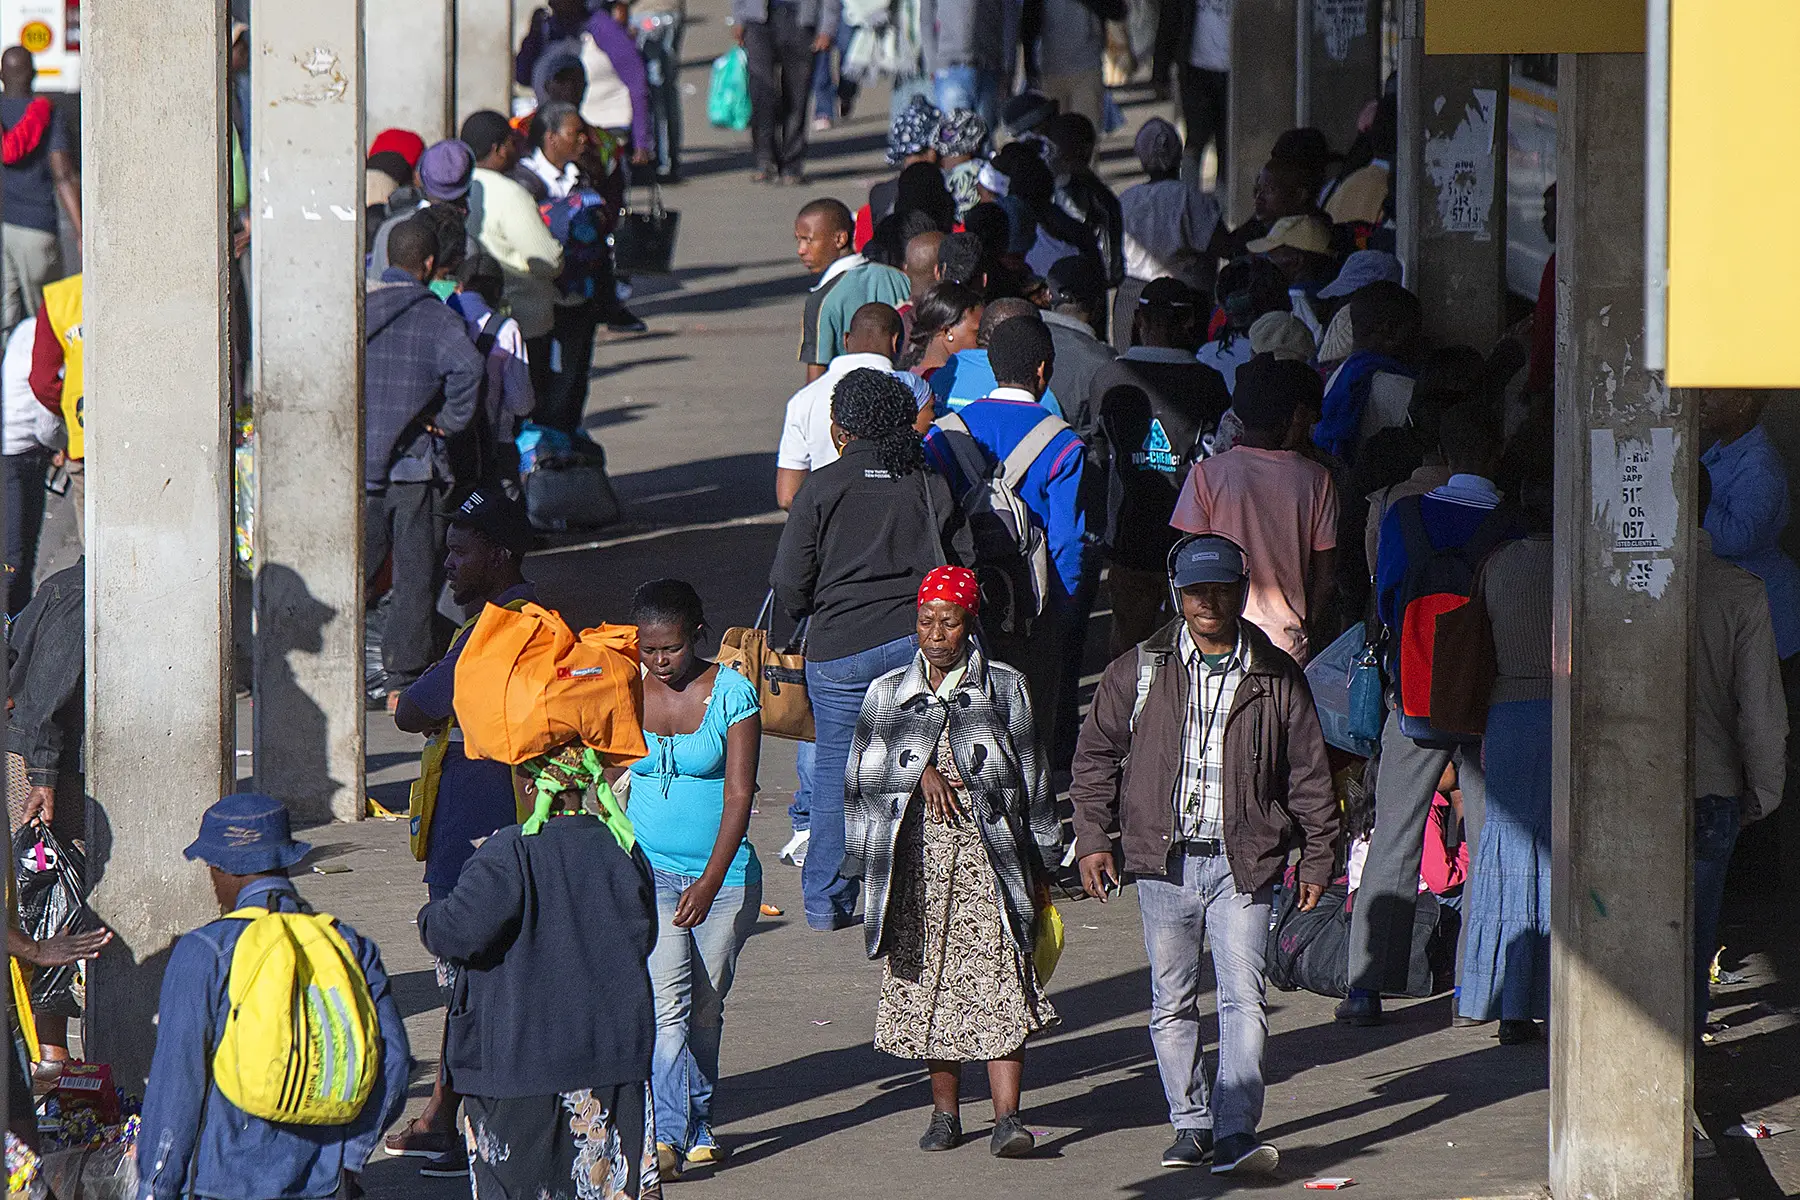 Commuters at a taxi station in Johannesburg